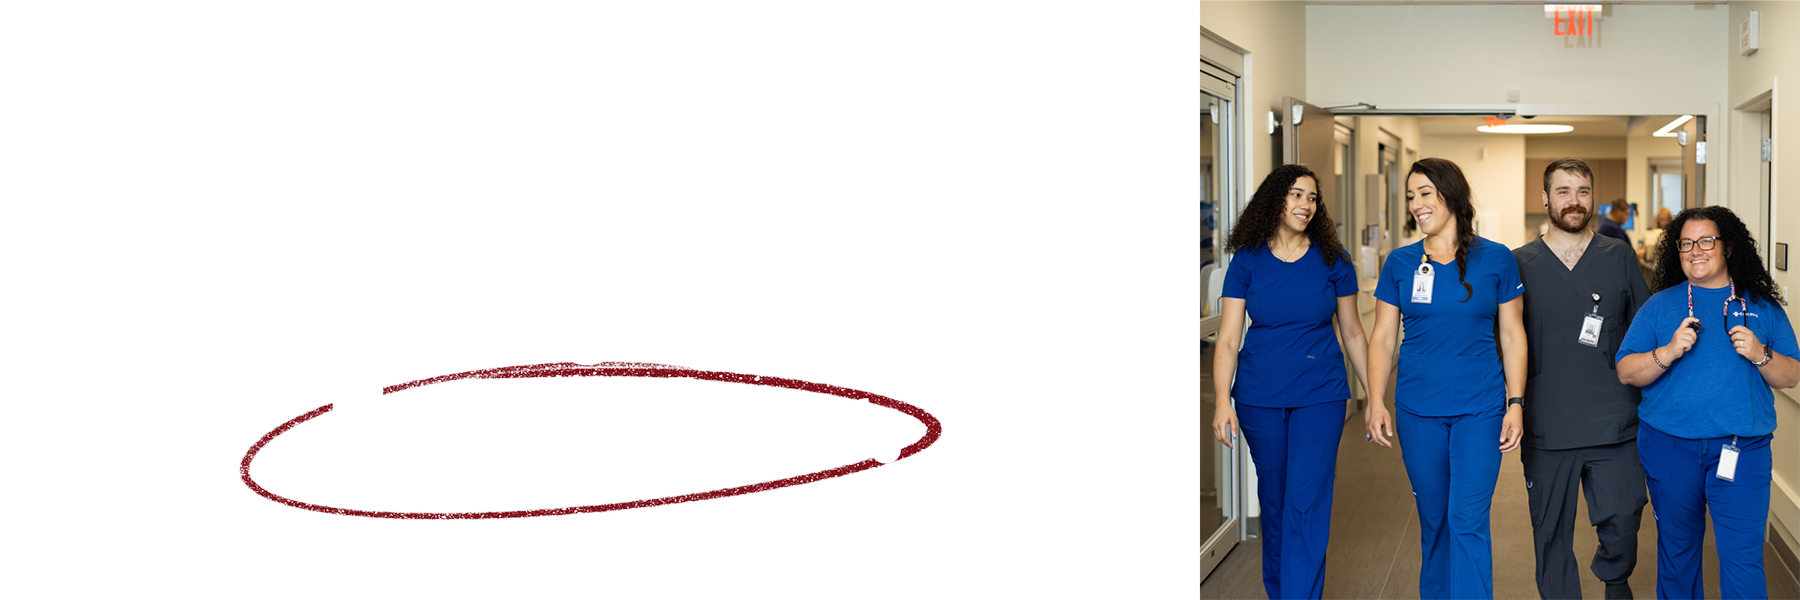 We work the
same way we win. Together.